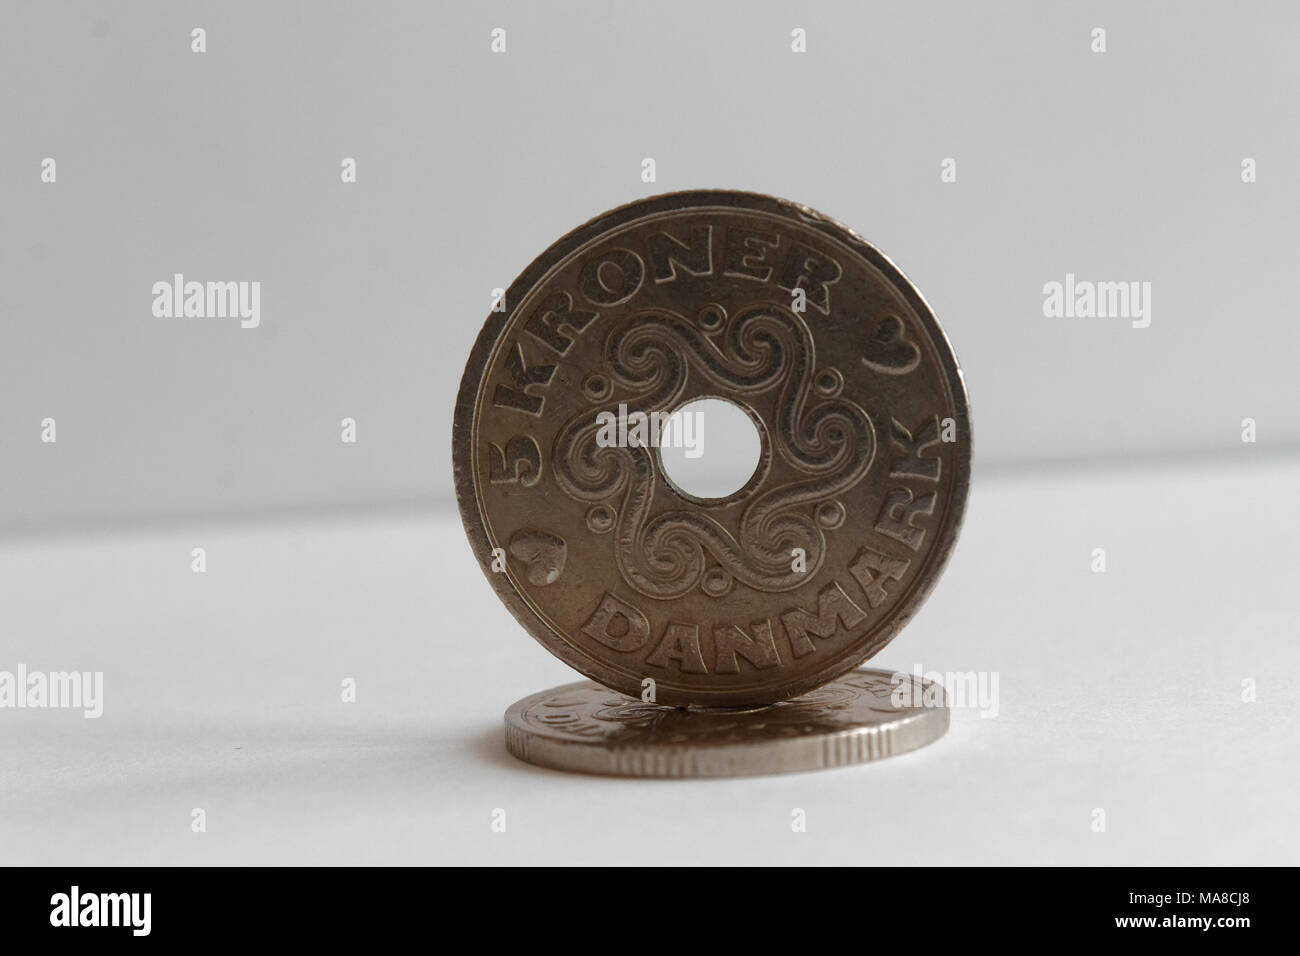 Two Denmark coins lie on isolated white background Denomination is 5 krone (crown) Stock Photo